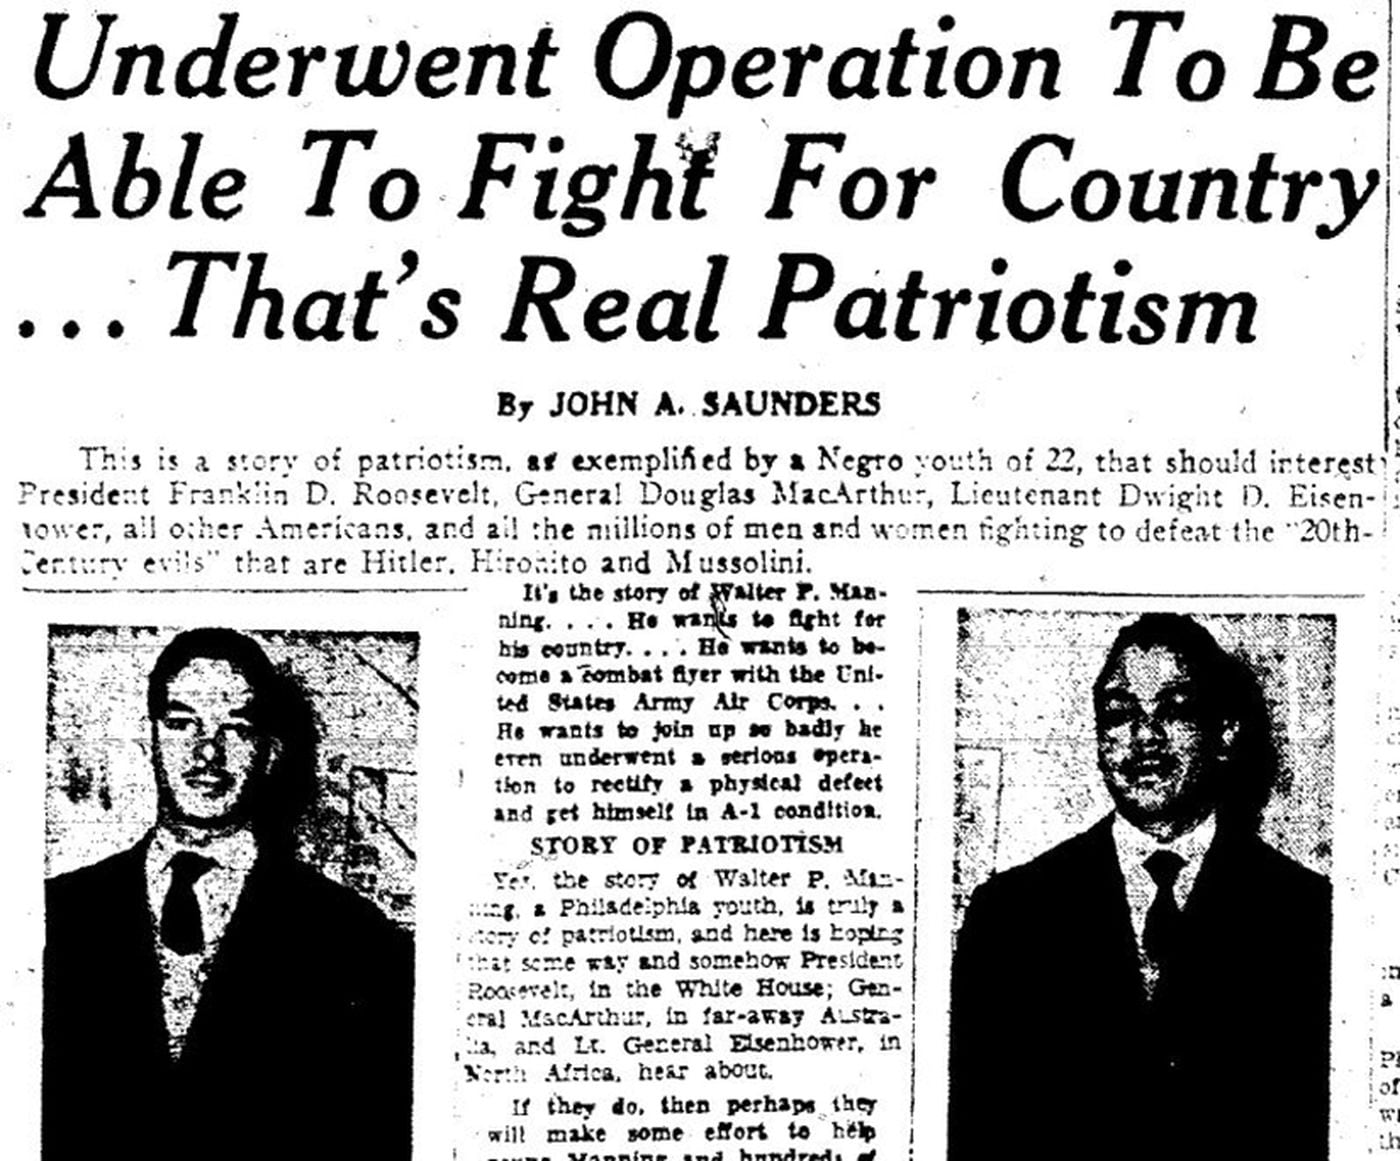 A newspaper story from 1942 detailing the heroism of Walter P. Manning.